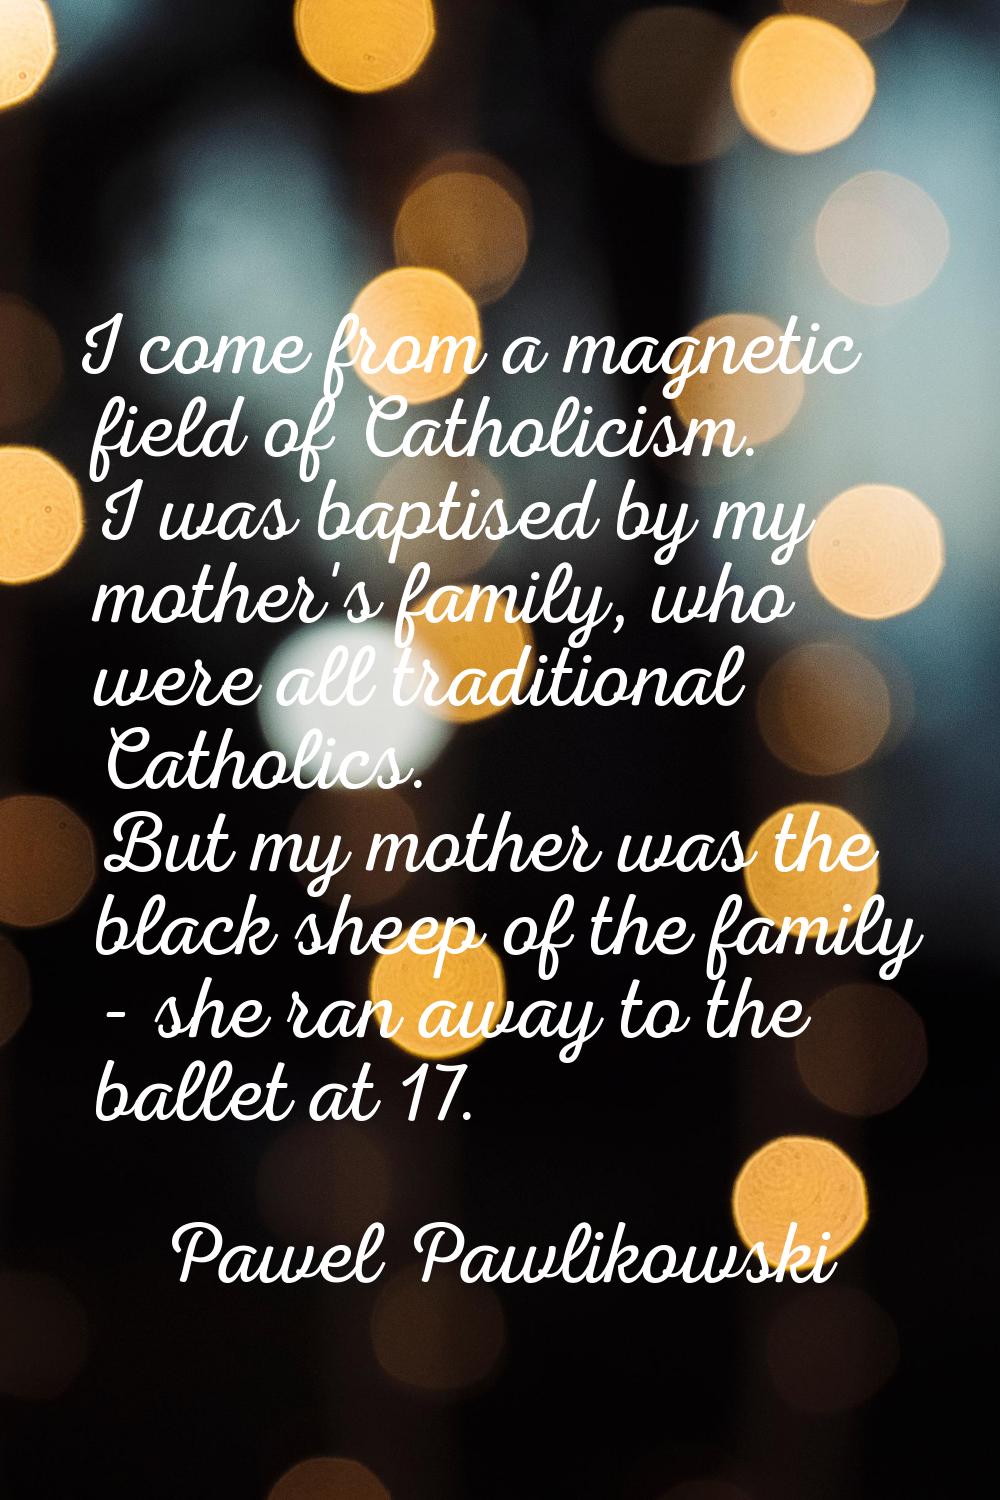 I come from a magnetic field of Catholicism. I was baptised by my mother's family, who were all tra